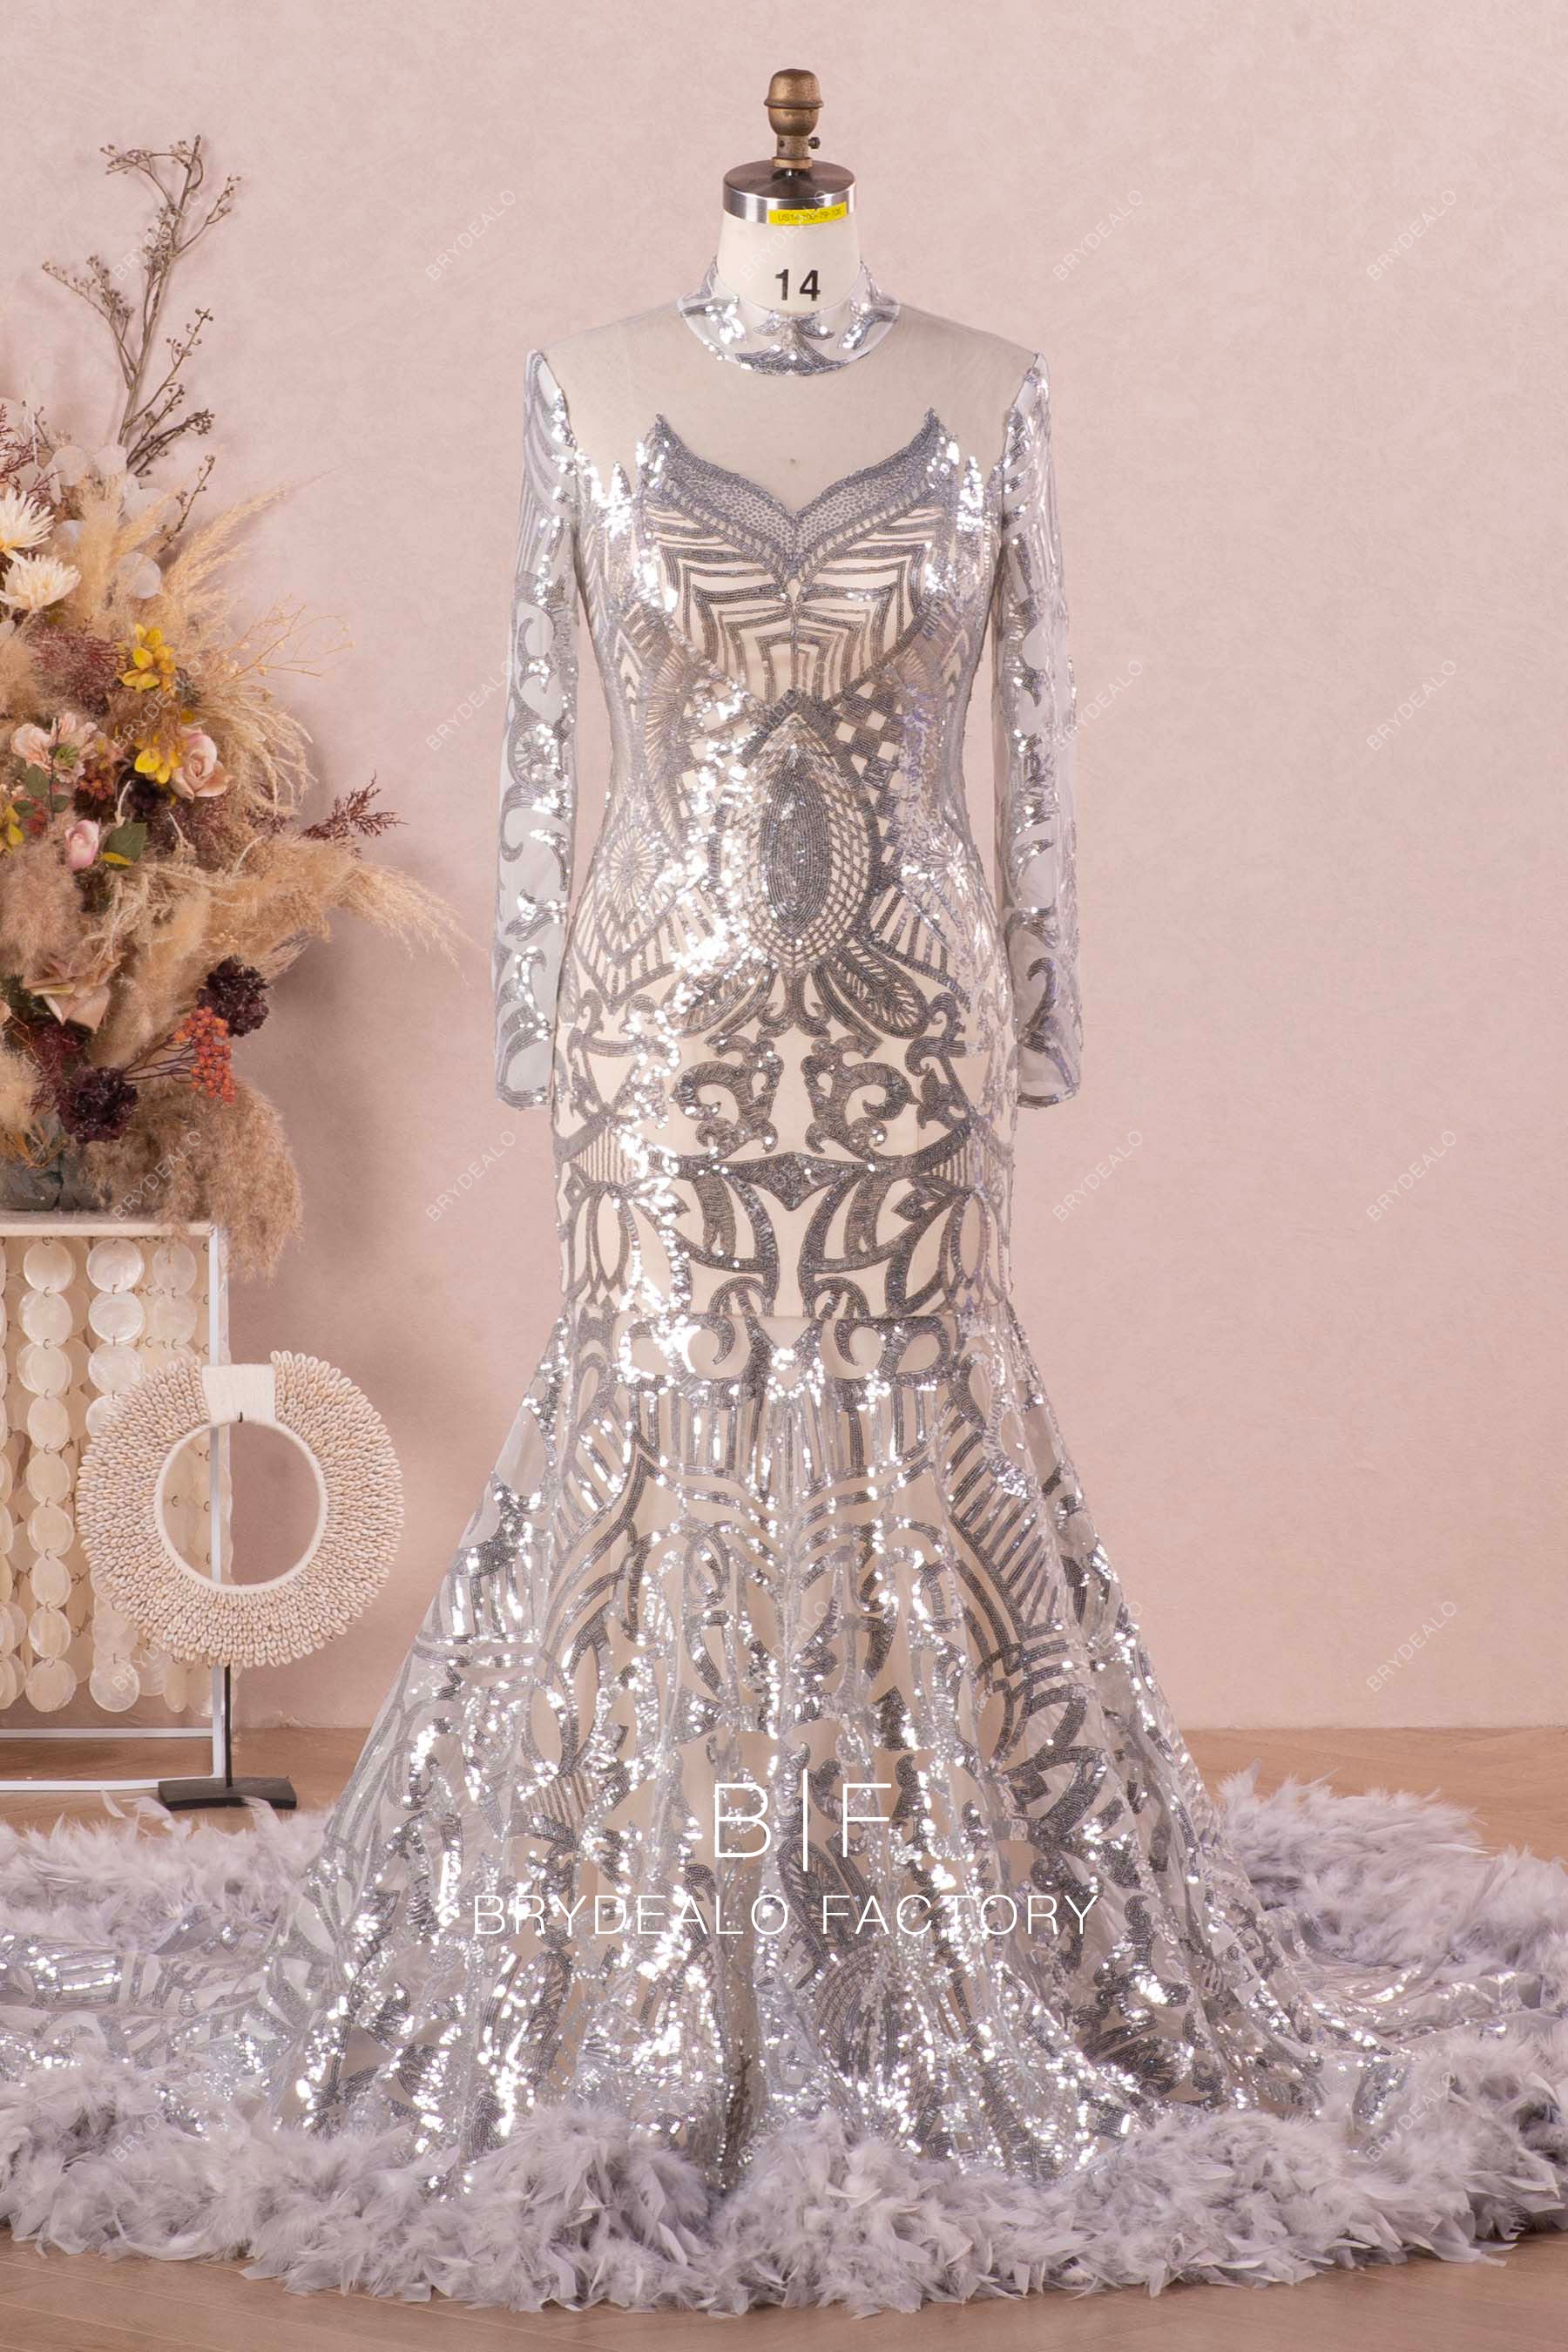 Silver Sparkly High Neck Patterned Sequin Feather Prom Dress